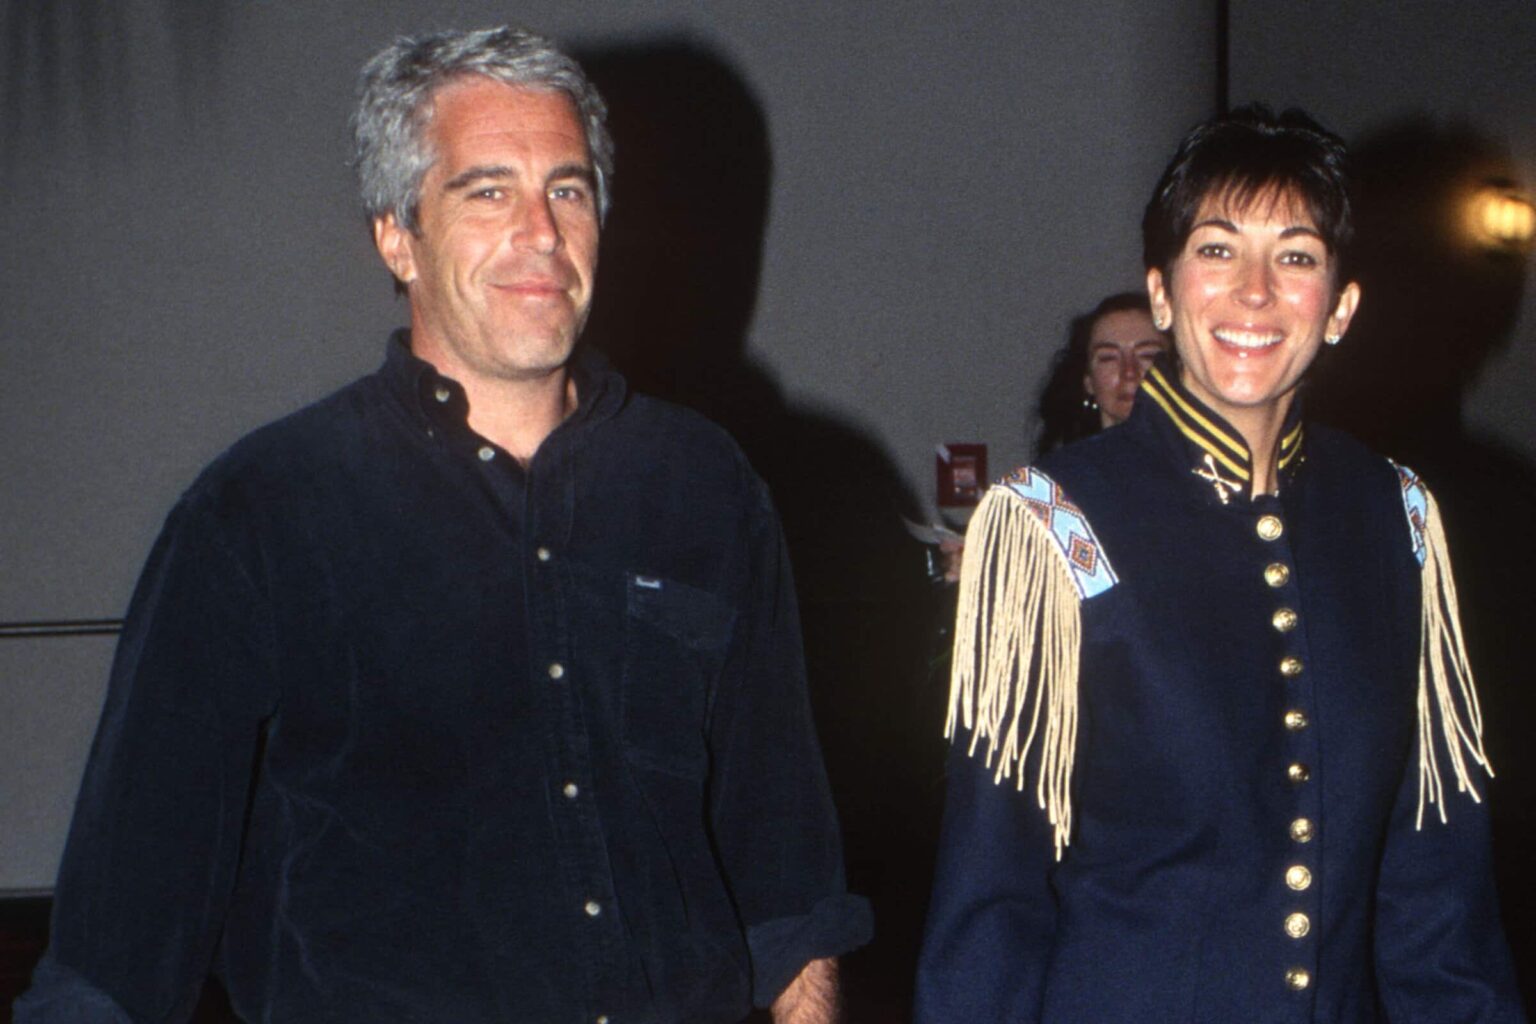 Jeffrey Epstein might be gone but Ghislaine Maxwell is facing multiple criminal charges related to sexual abuse. Seize this moment to get the latest info!